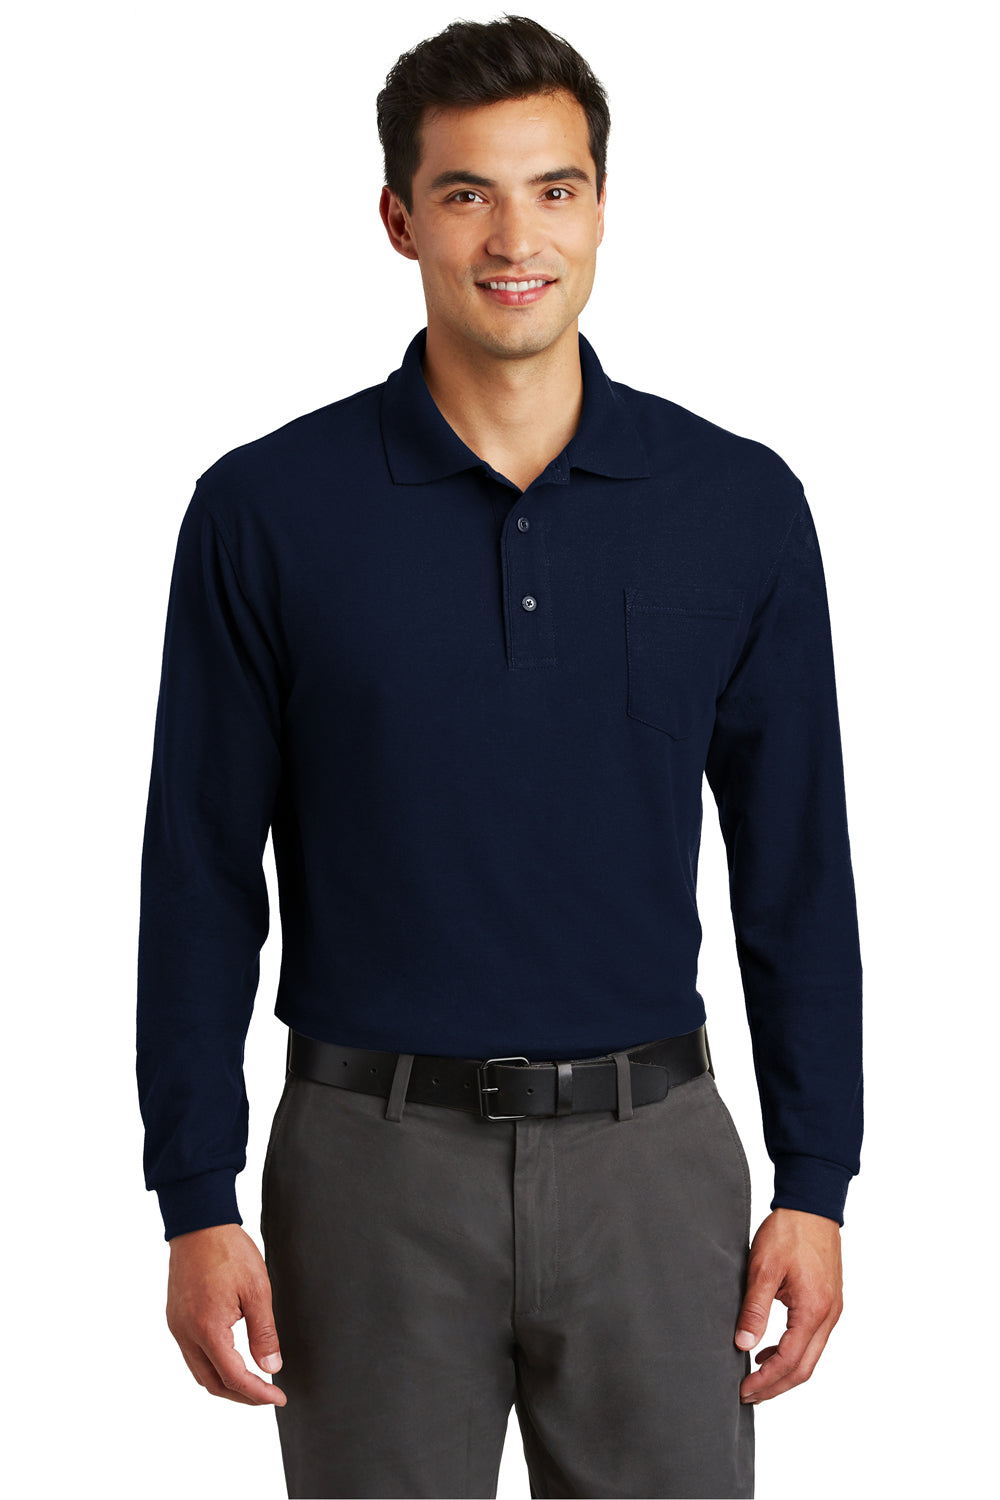 Port Authority K500LSP Mens Silk Touch Wrinkle Resistant Long Sleeve Polo Shirt w/ Pocket Navy Blue Front